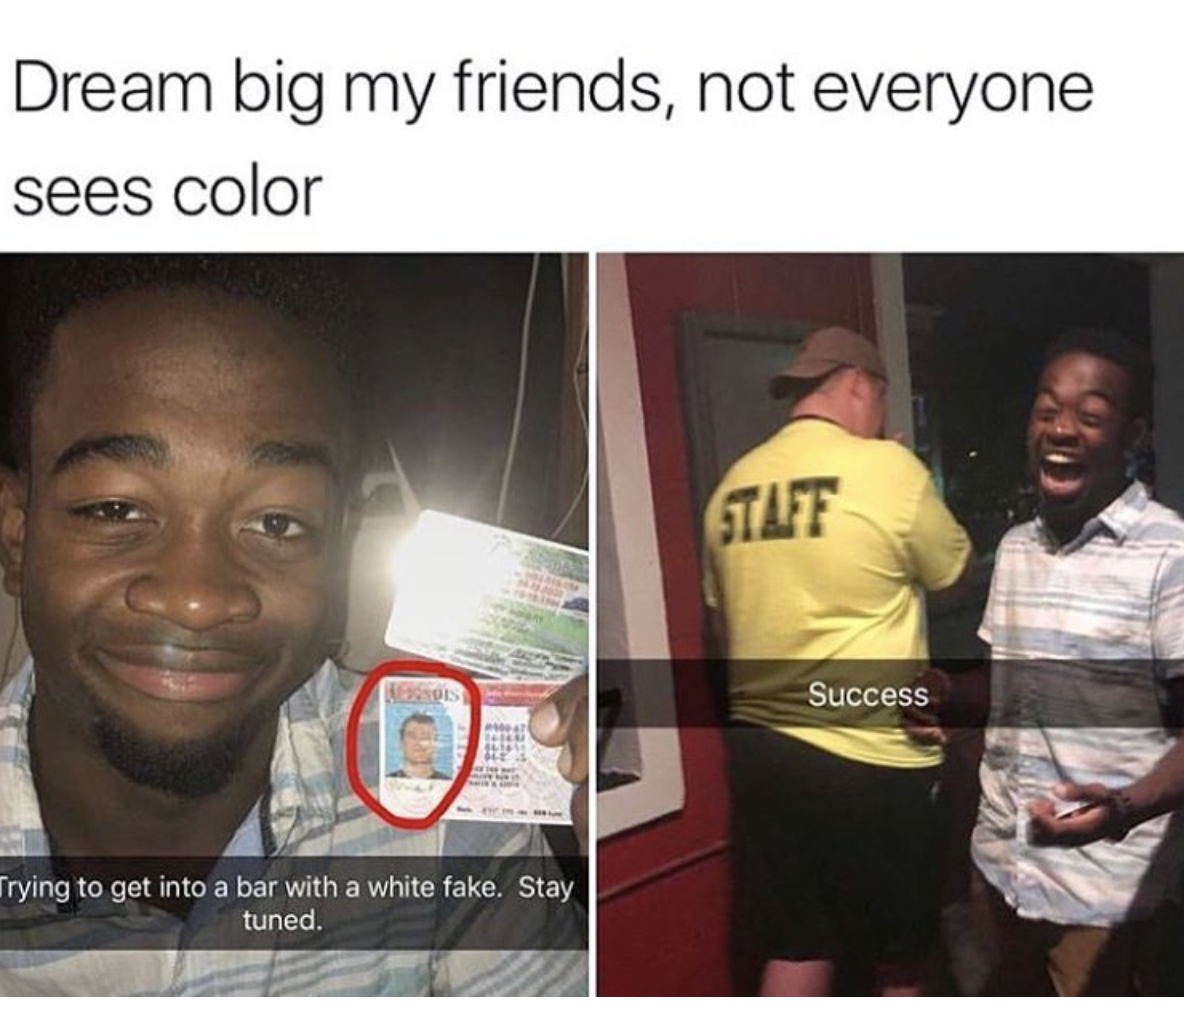 Funny snapchats of black man getting into a bar with white fake ID